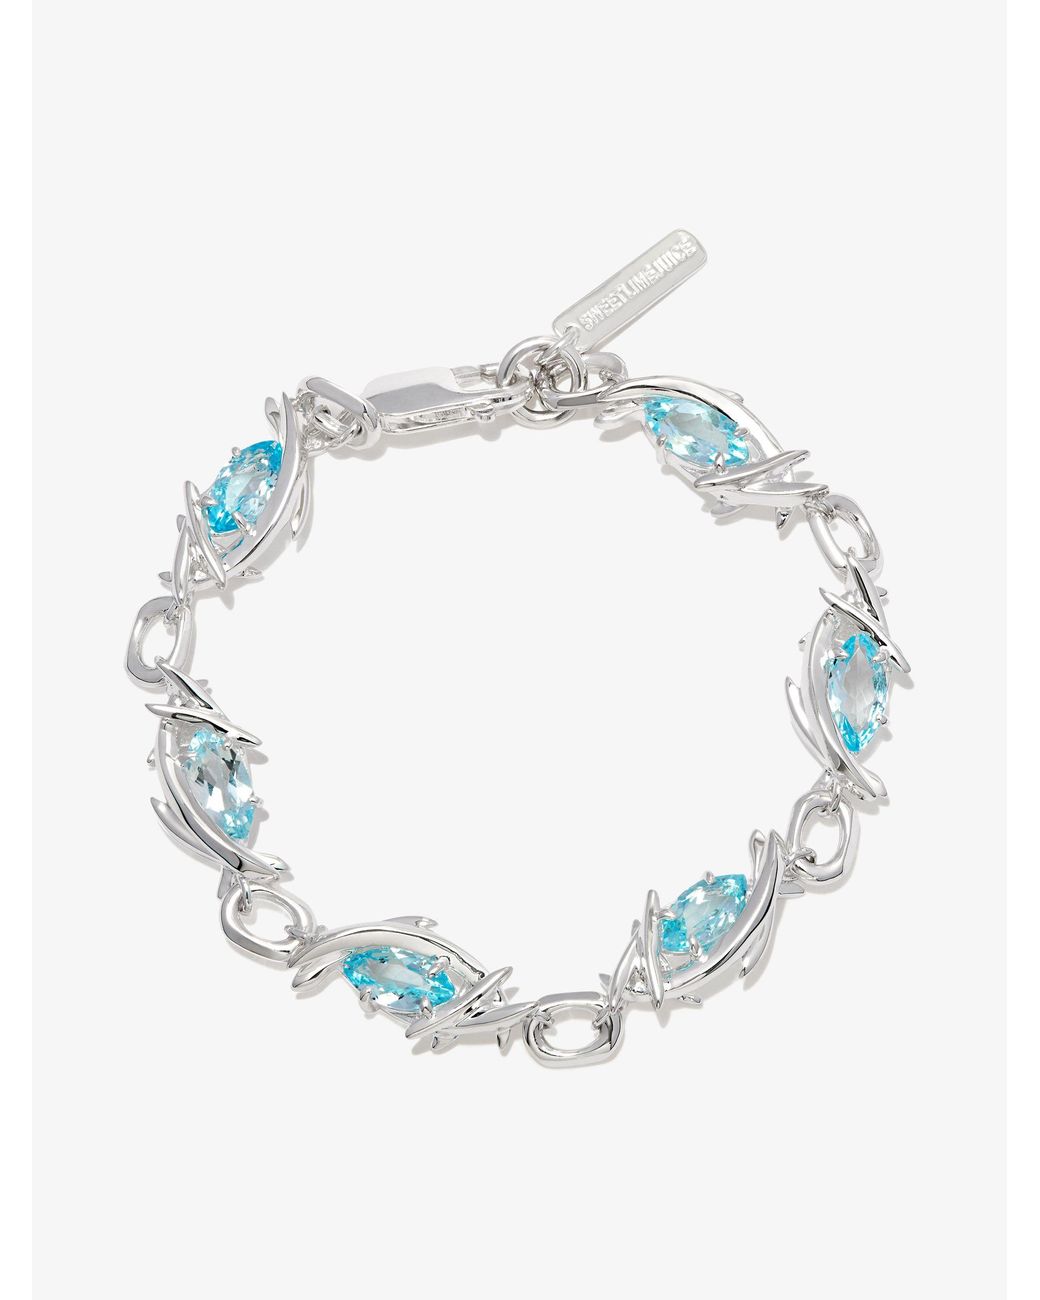 Blue Topaz and Sterling Silver Cuff Bracelet from Bali - Spiral Temple |  NOVICA